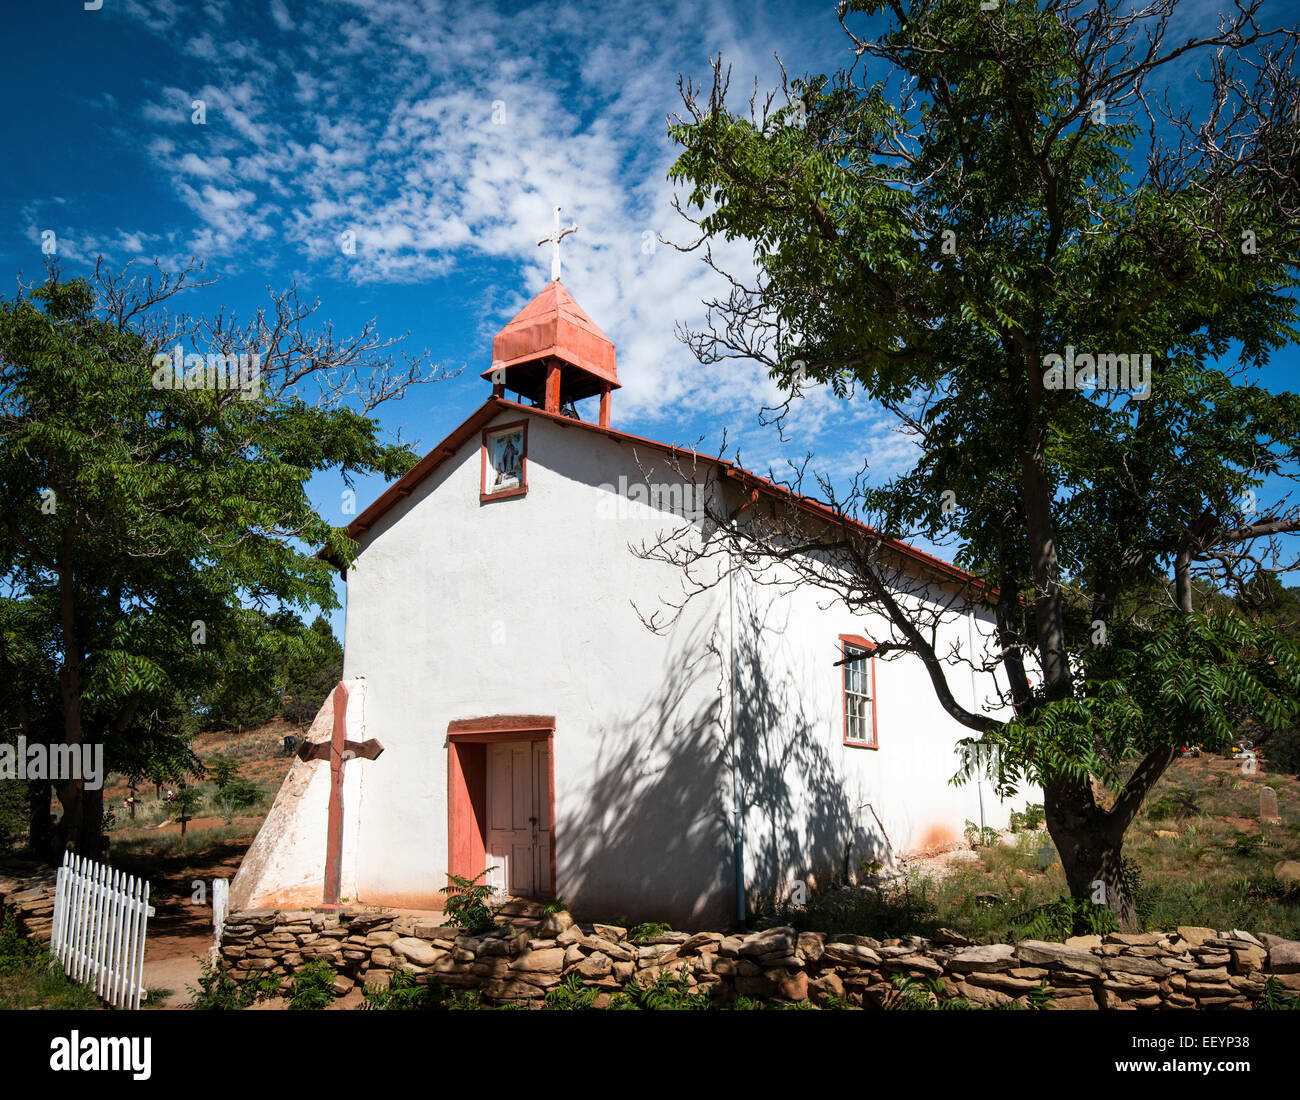 Old Chapel in Apache Canyon near Santa Fe, New Mexico.  Built by Bishop Lamy over 150 years ago. Stock Photo